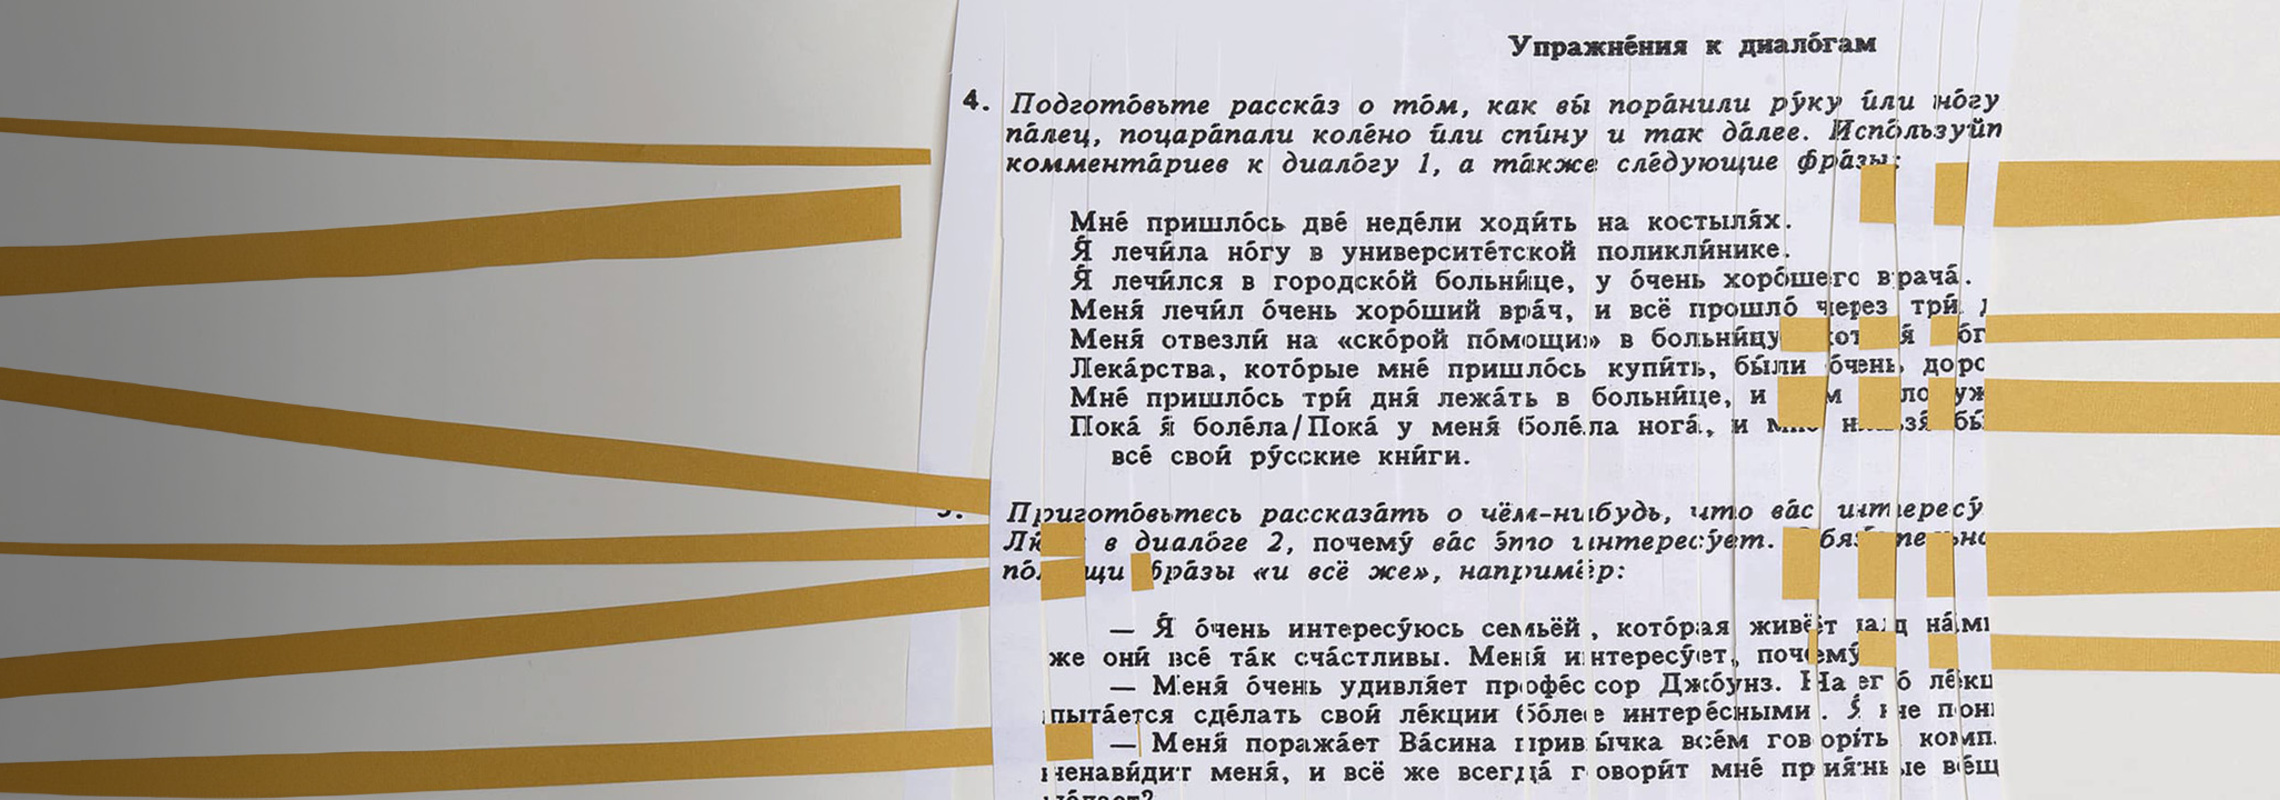 Illustration of text with yellow lines